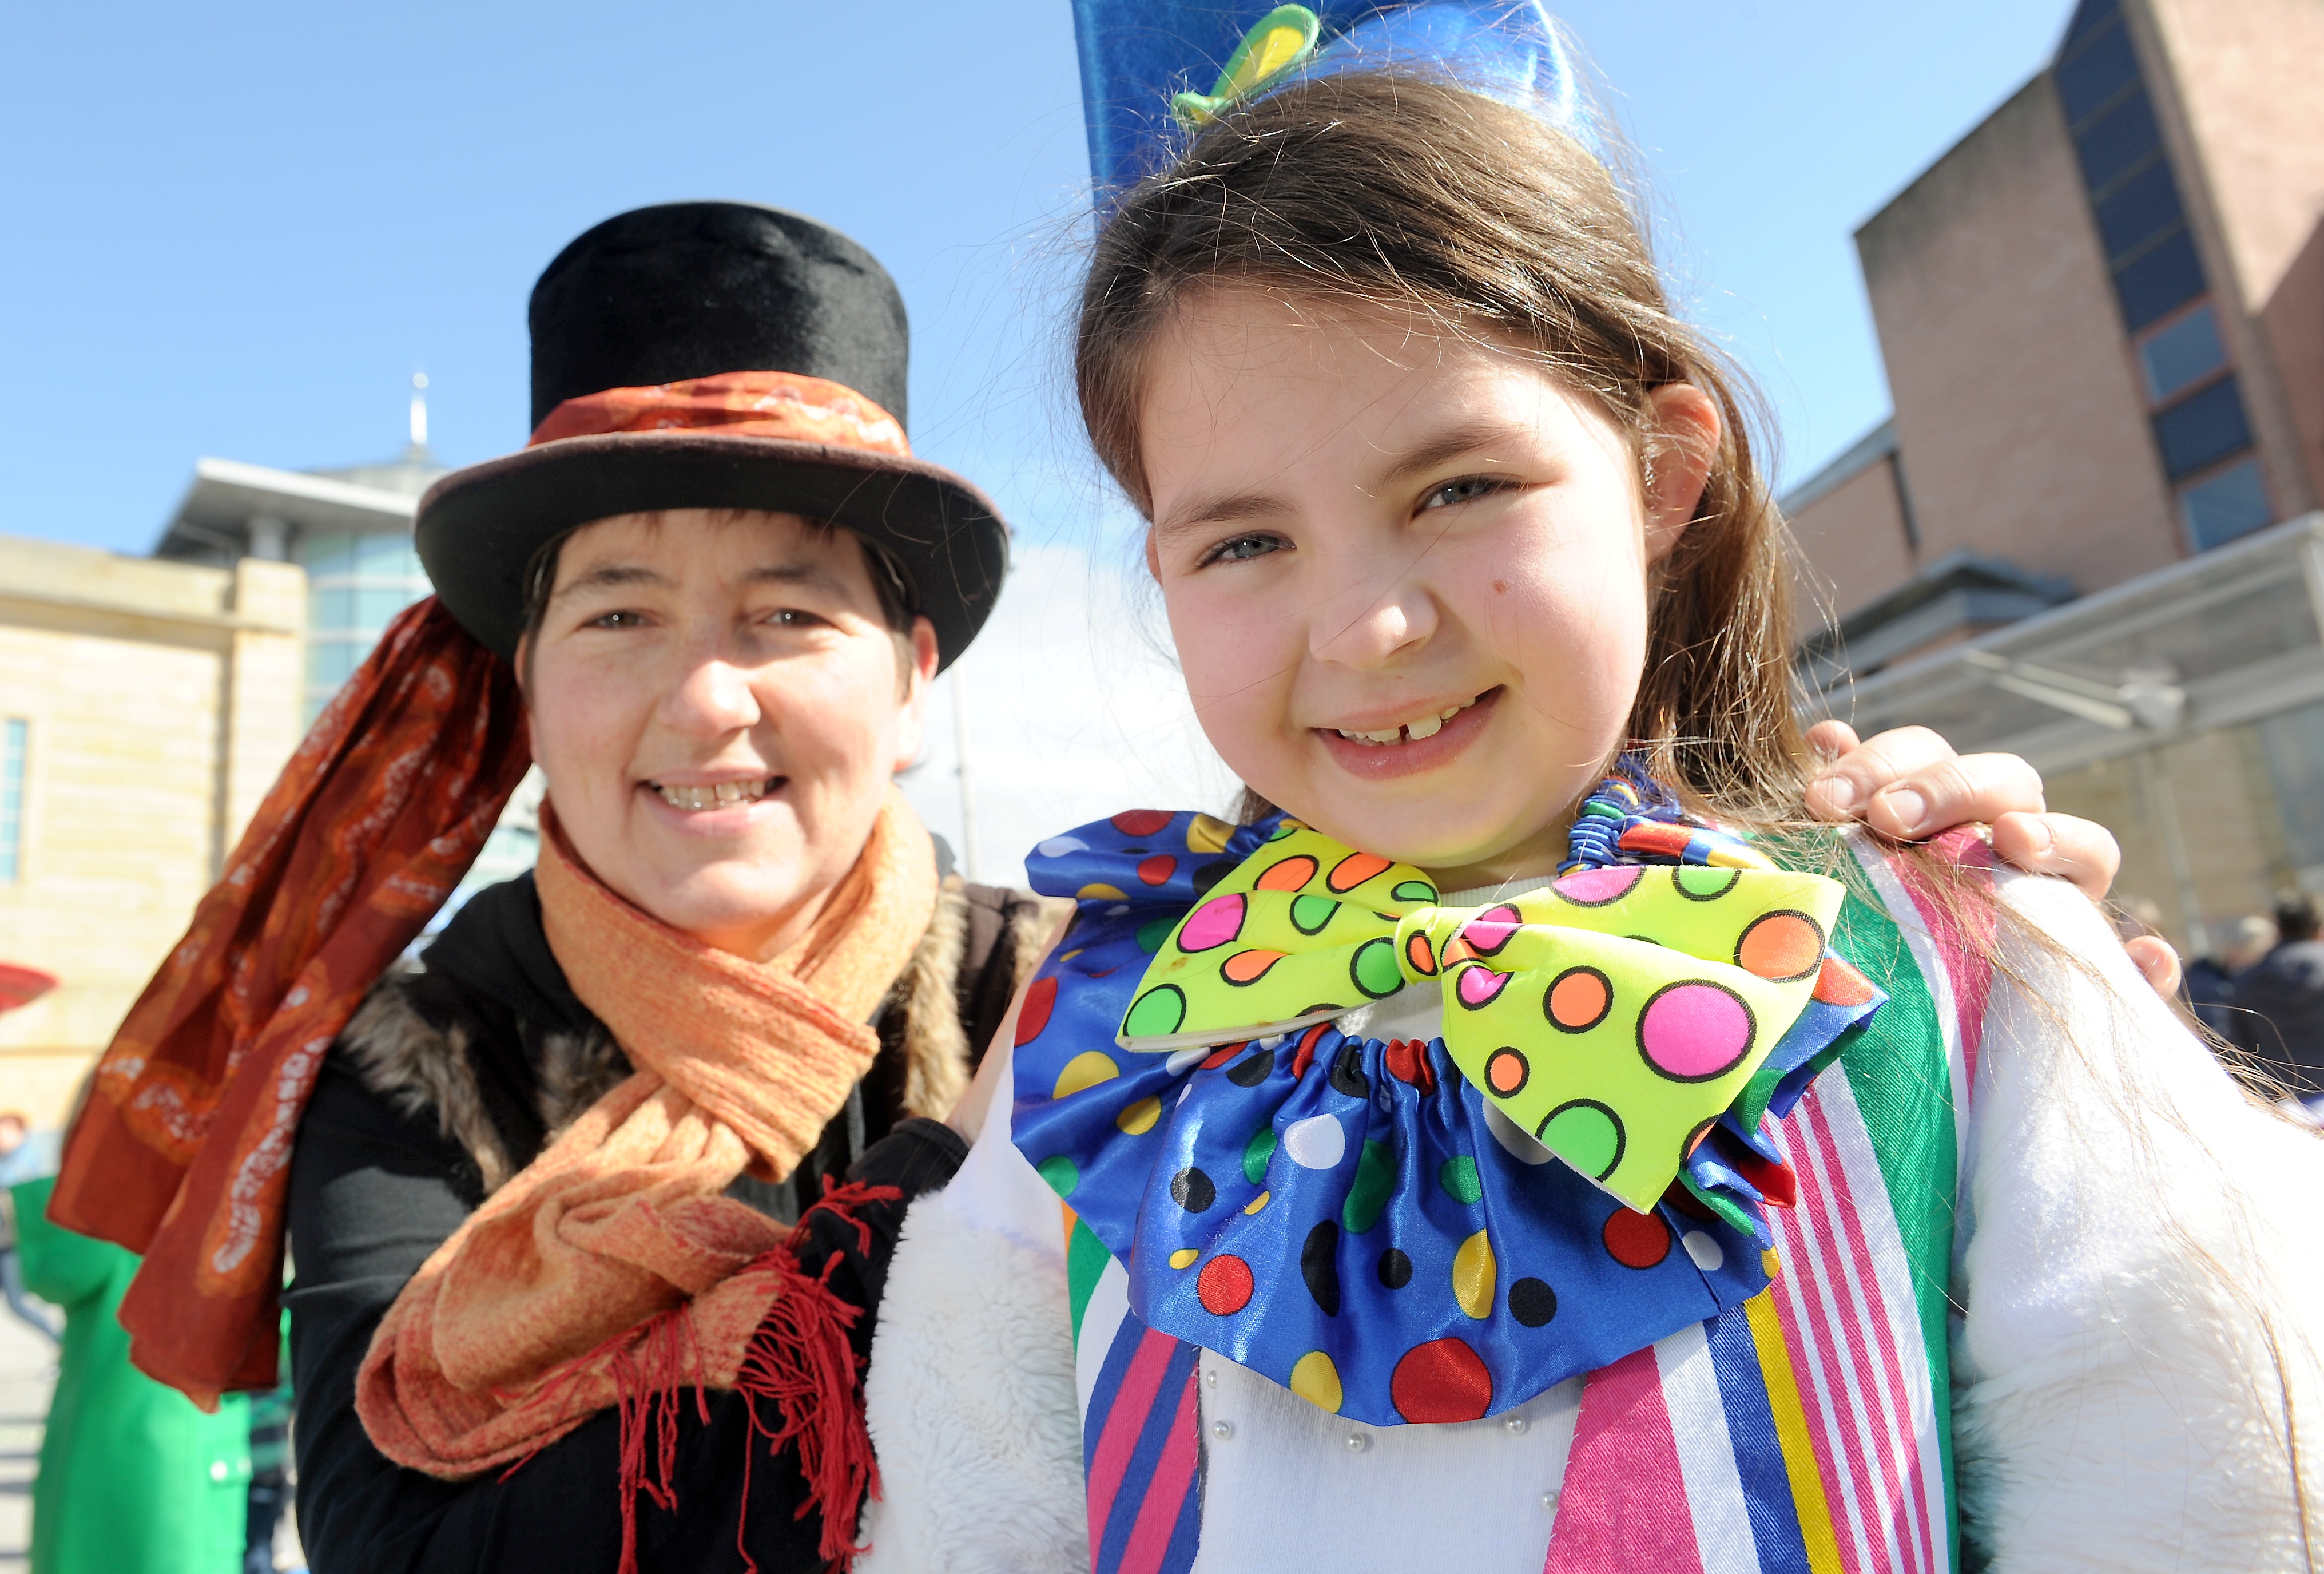 'Clown' Masie Meechan (8) of Tain is helped by Karen Grant of Flyagaric Performing Arts of Forres.